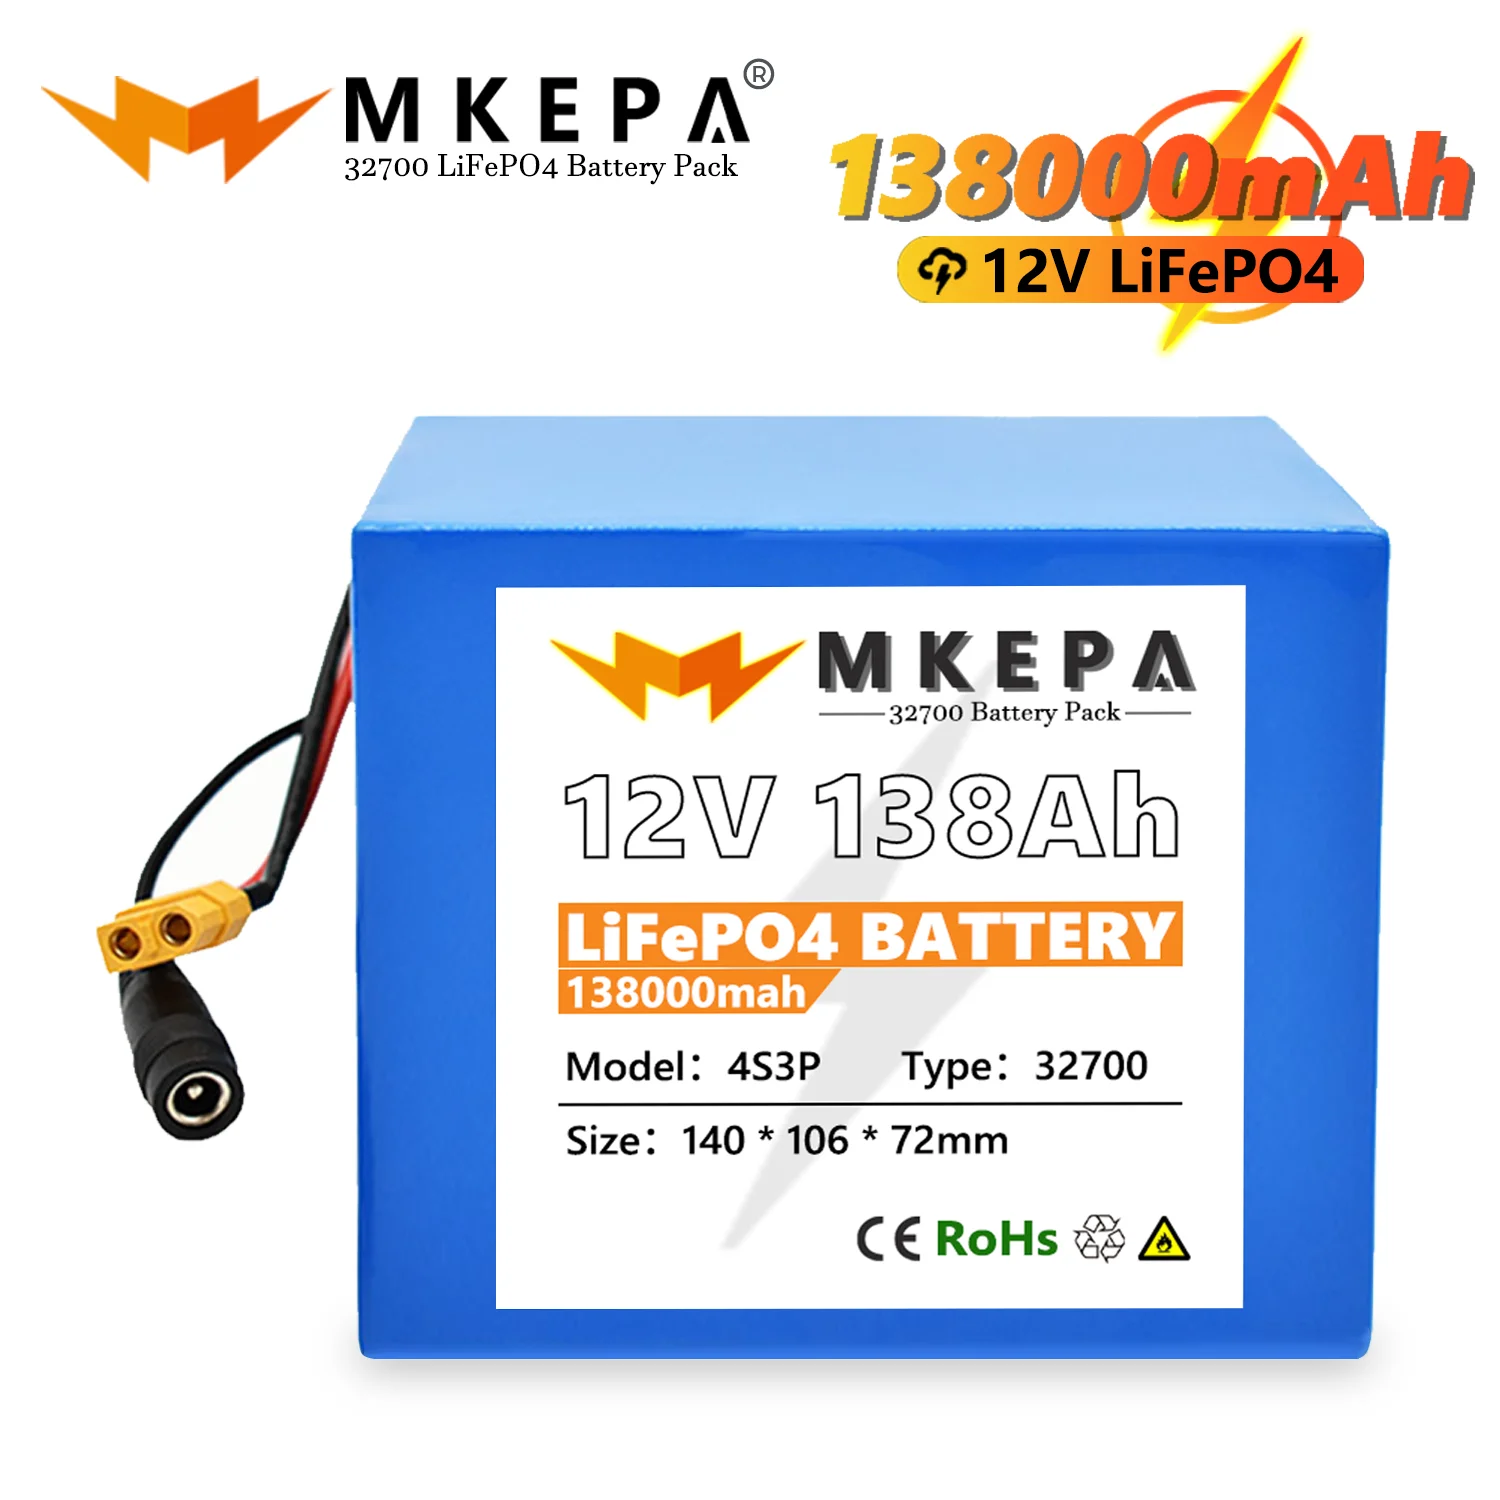 32700 Lifepo4 Battery Pack 4S3P 12.8V 138000mAh 4S 40A 100A Balanced BMS for Electric Boat and Uninterrupted Power Supply 12V